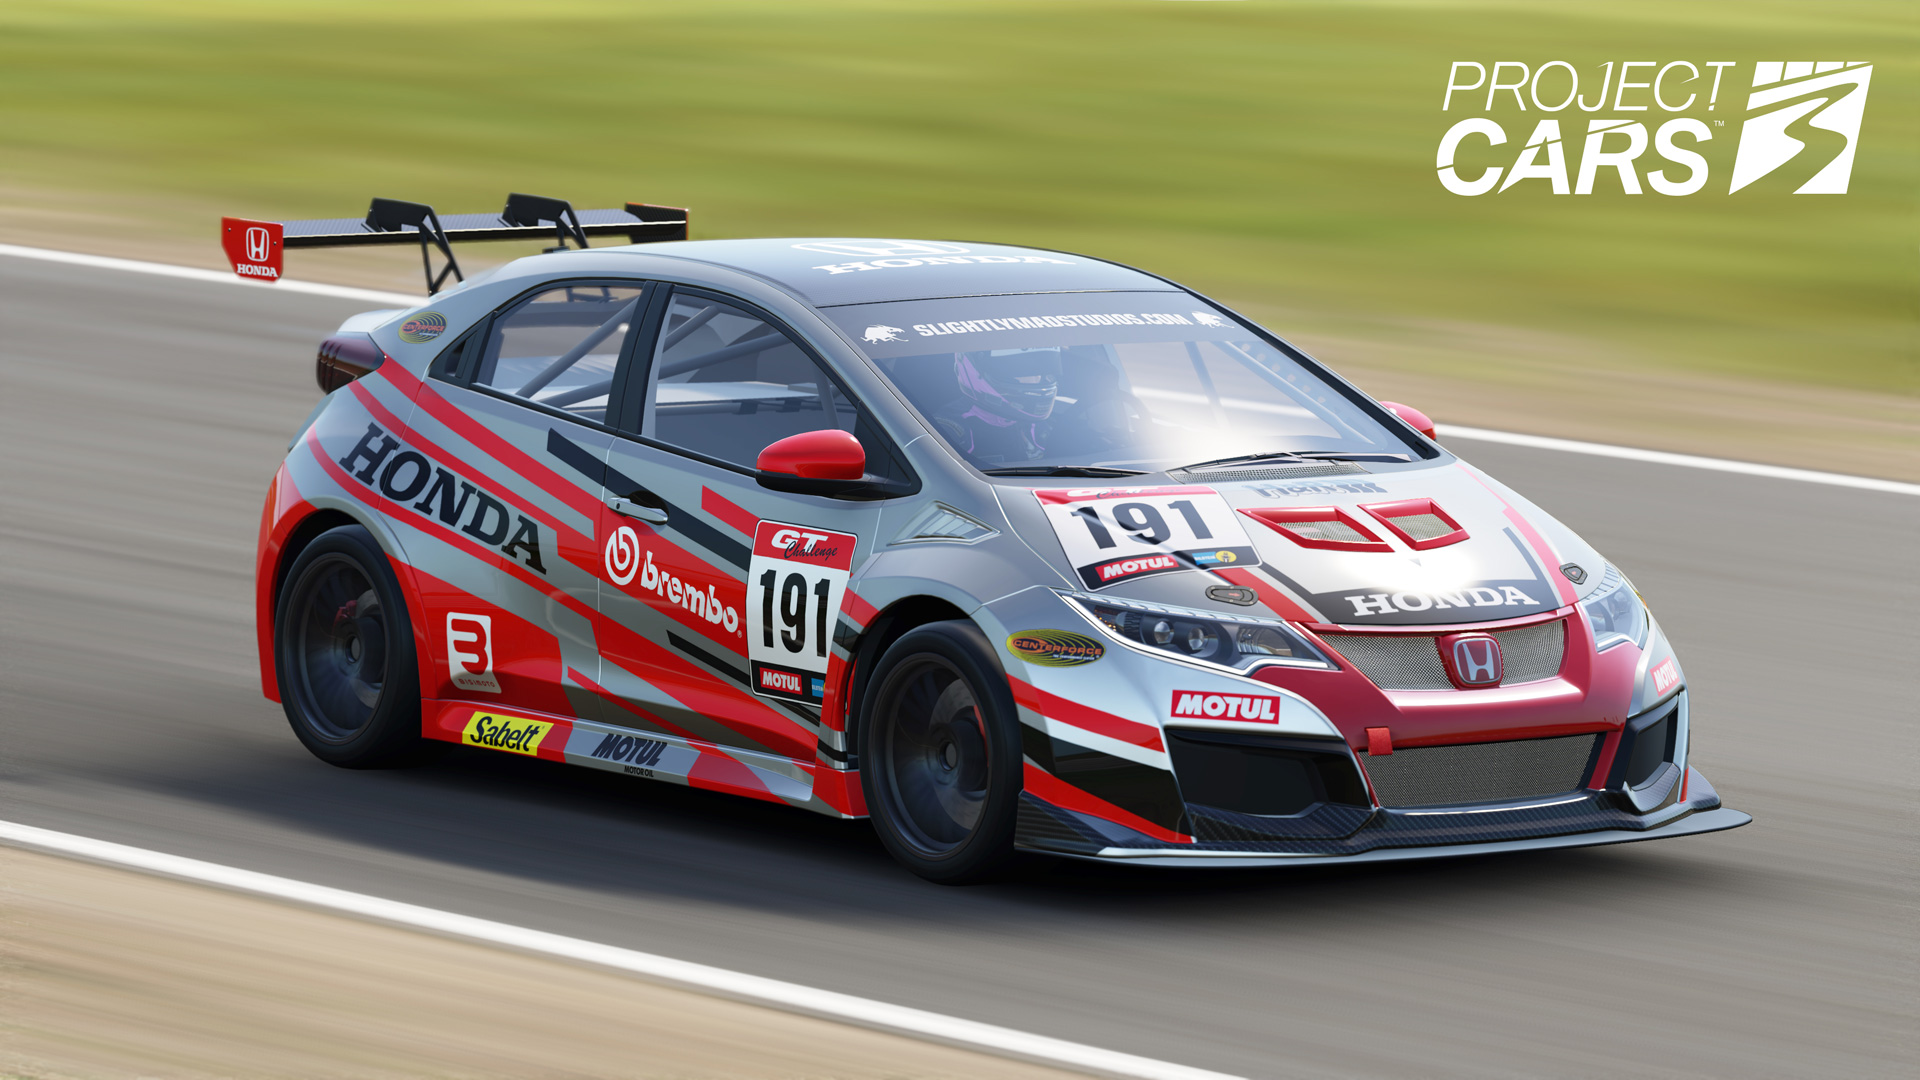 Project CARS 3 Available Now: The Dev Team’s Favorite Performance Car Upgrades